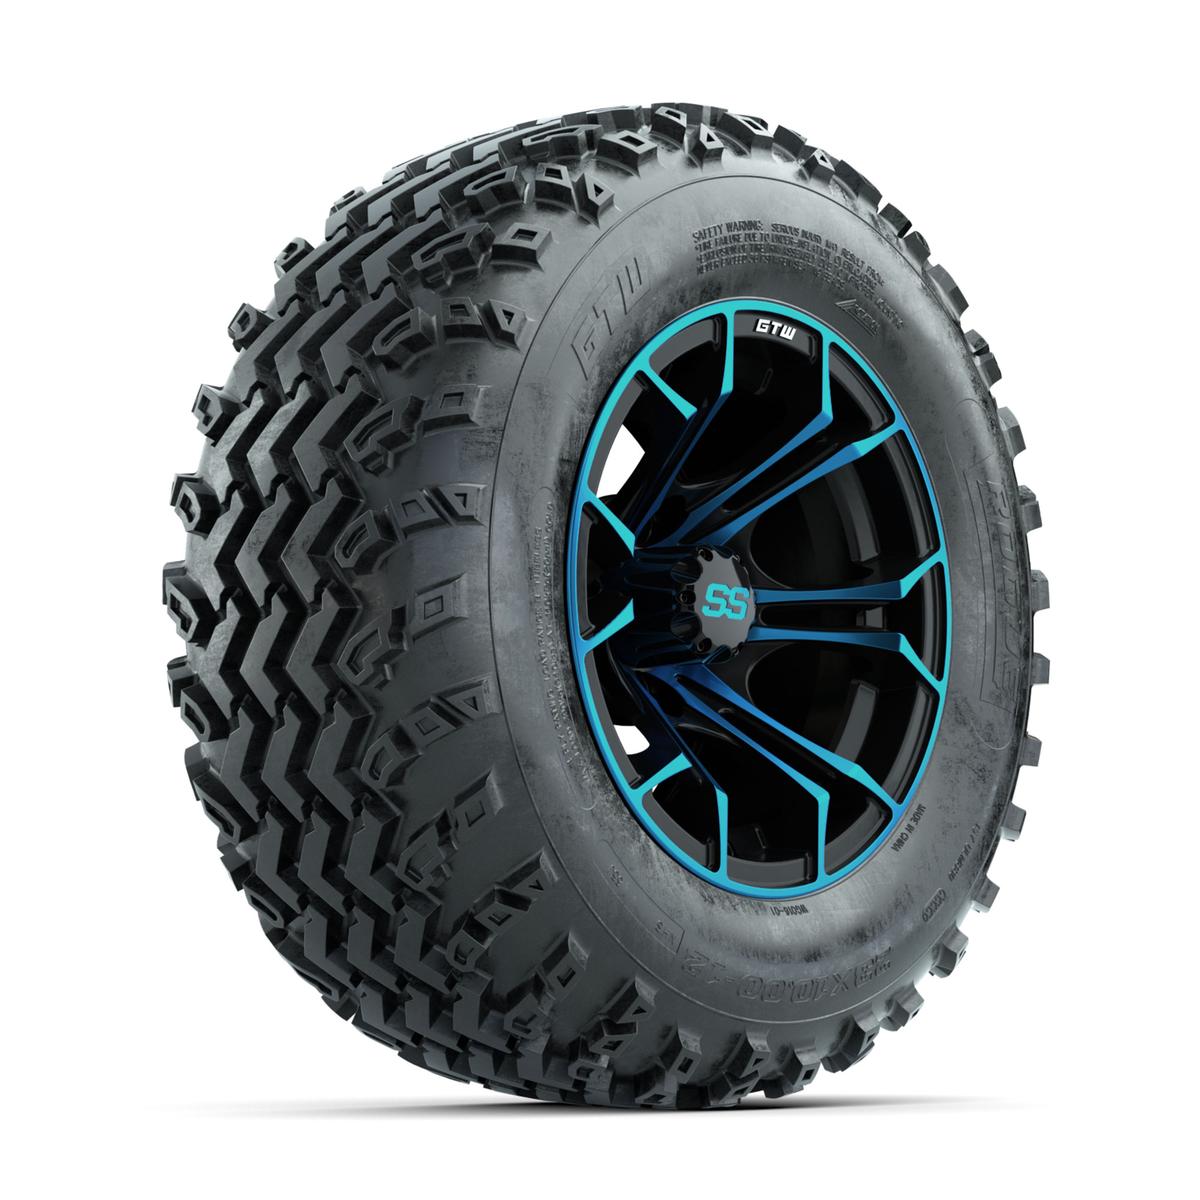 GTW Spyder Blue/Black 12 in Wheels with 23x10.00-12 Rogue All Terrain Tires – Full Set